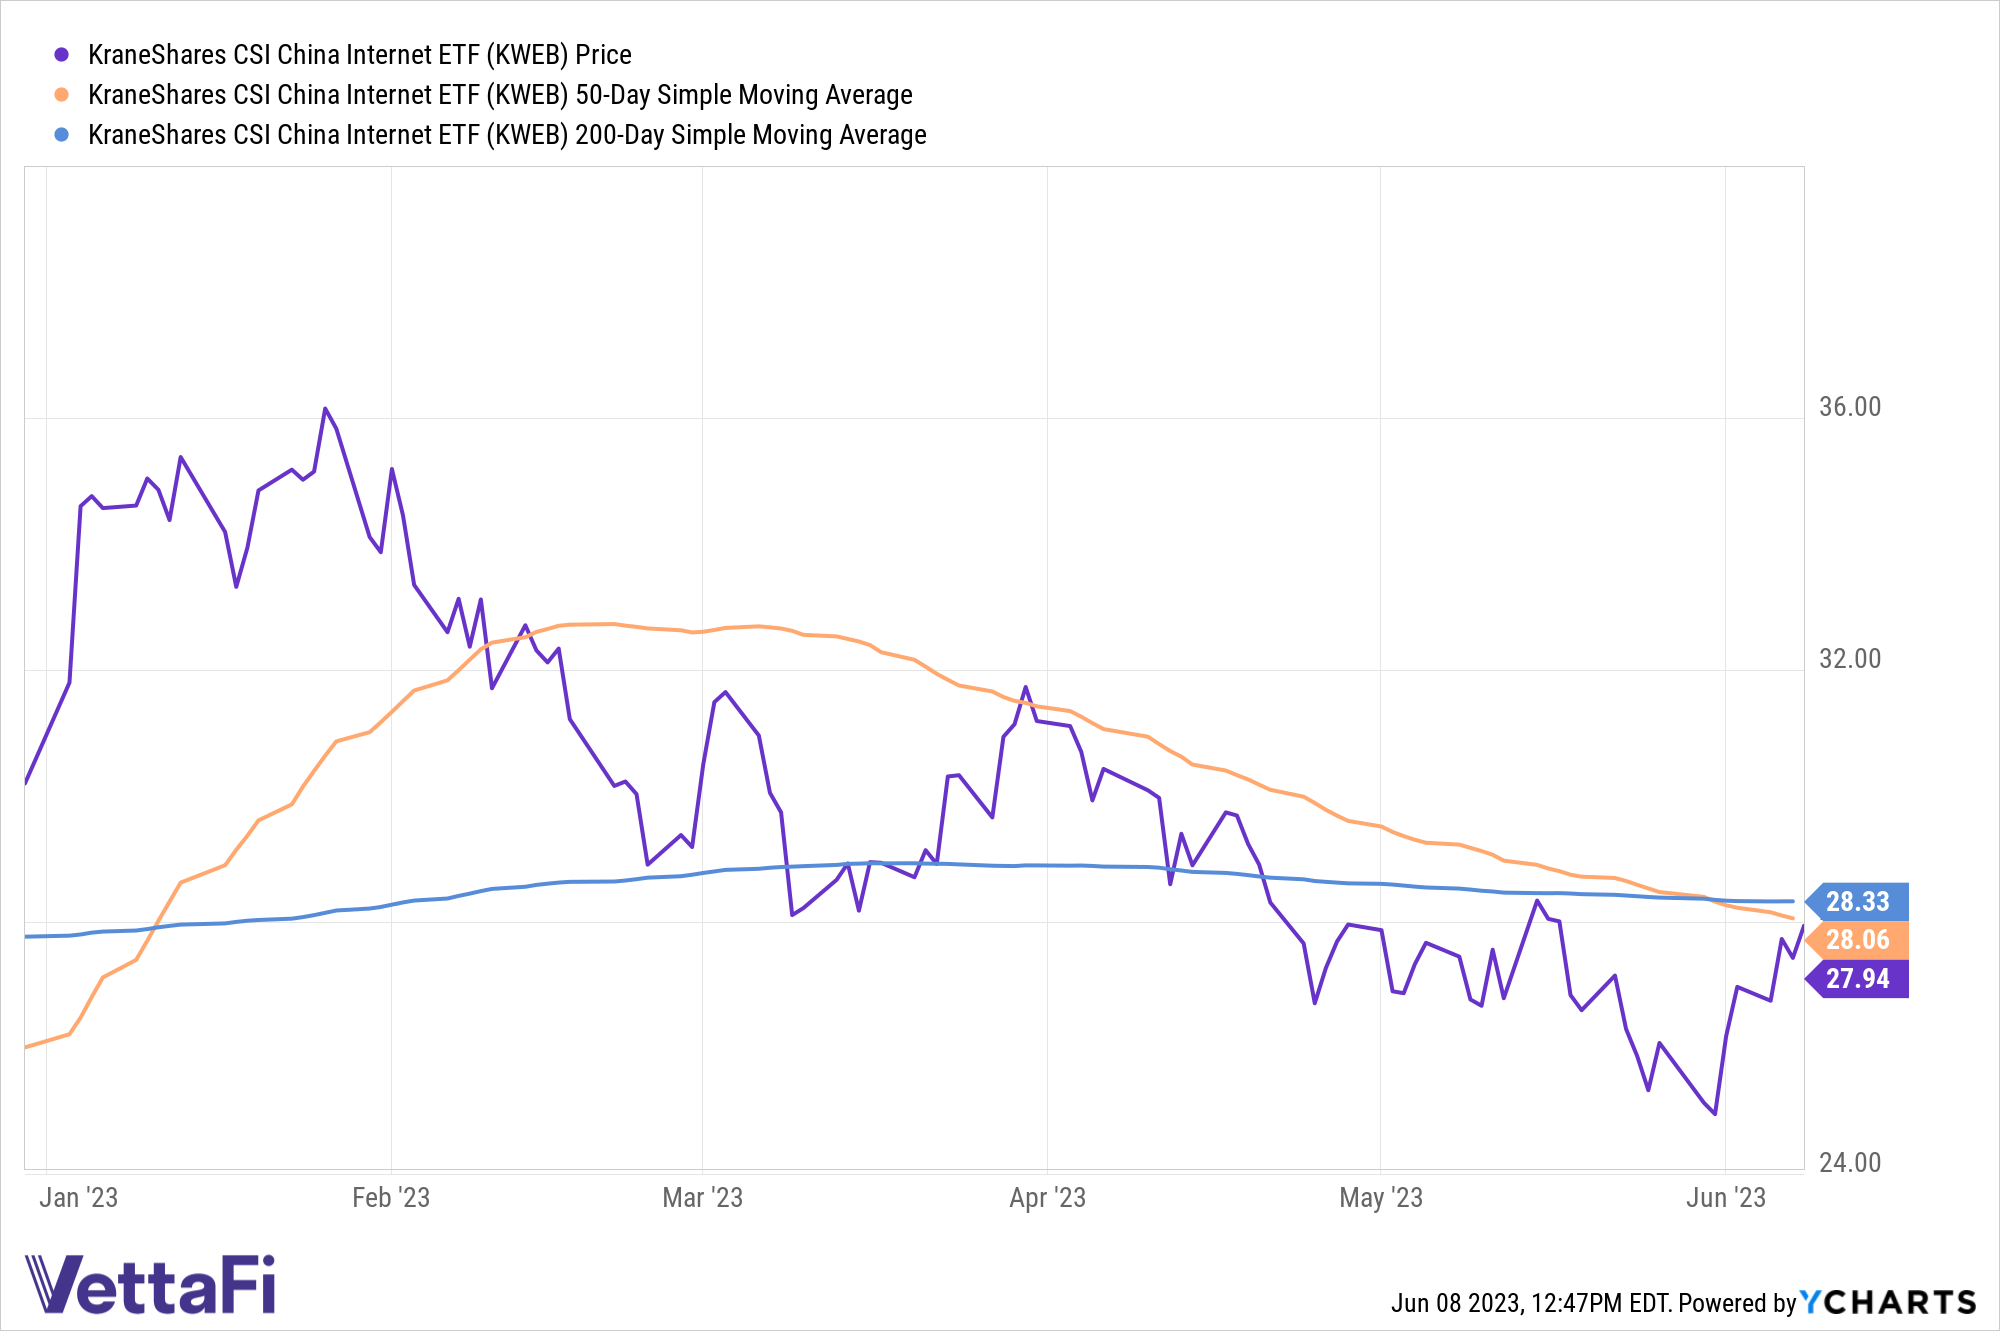 Price chart of KWEB year-to-date. The fund is currently at 27.94 while its 50-day SMA is 28.06 and 200-day SMA is 28.33